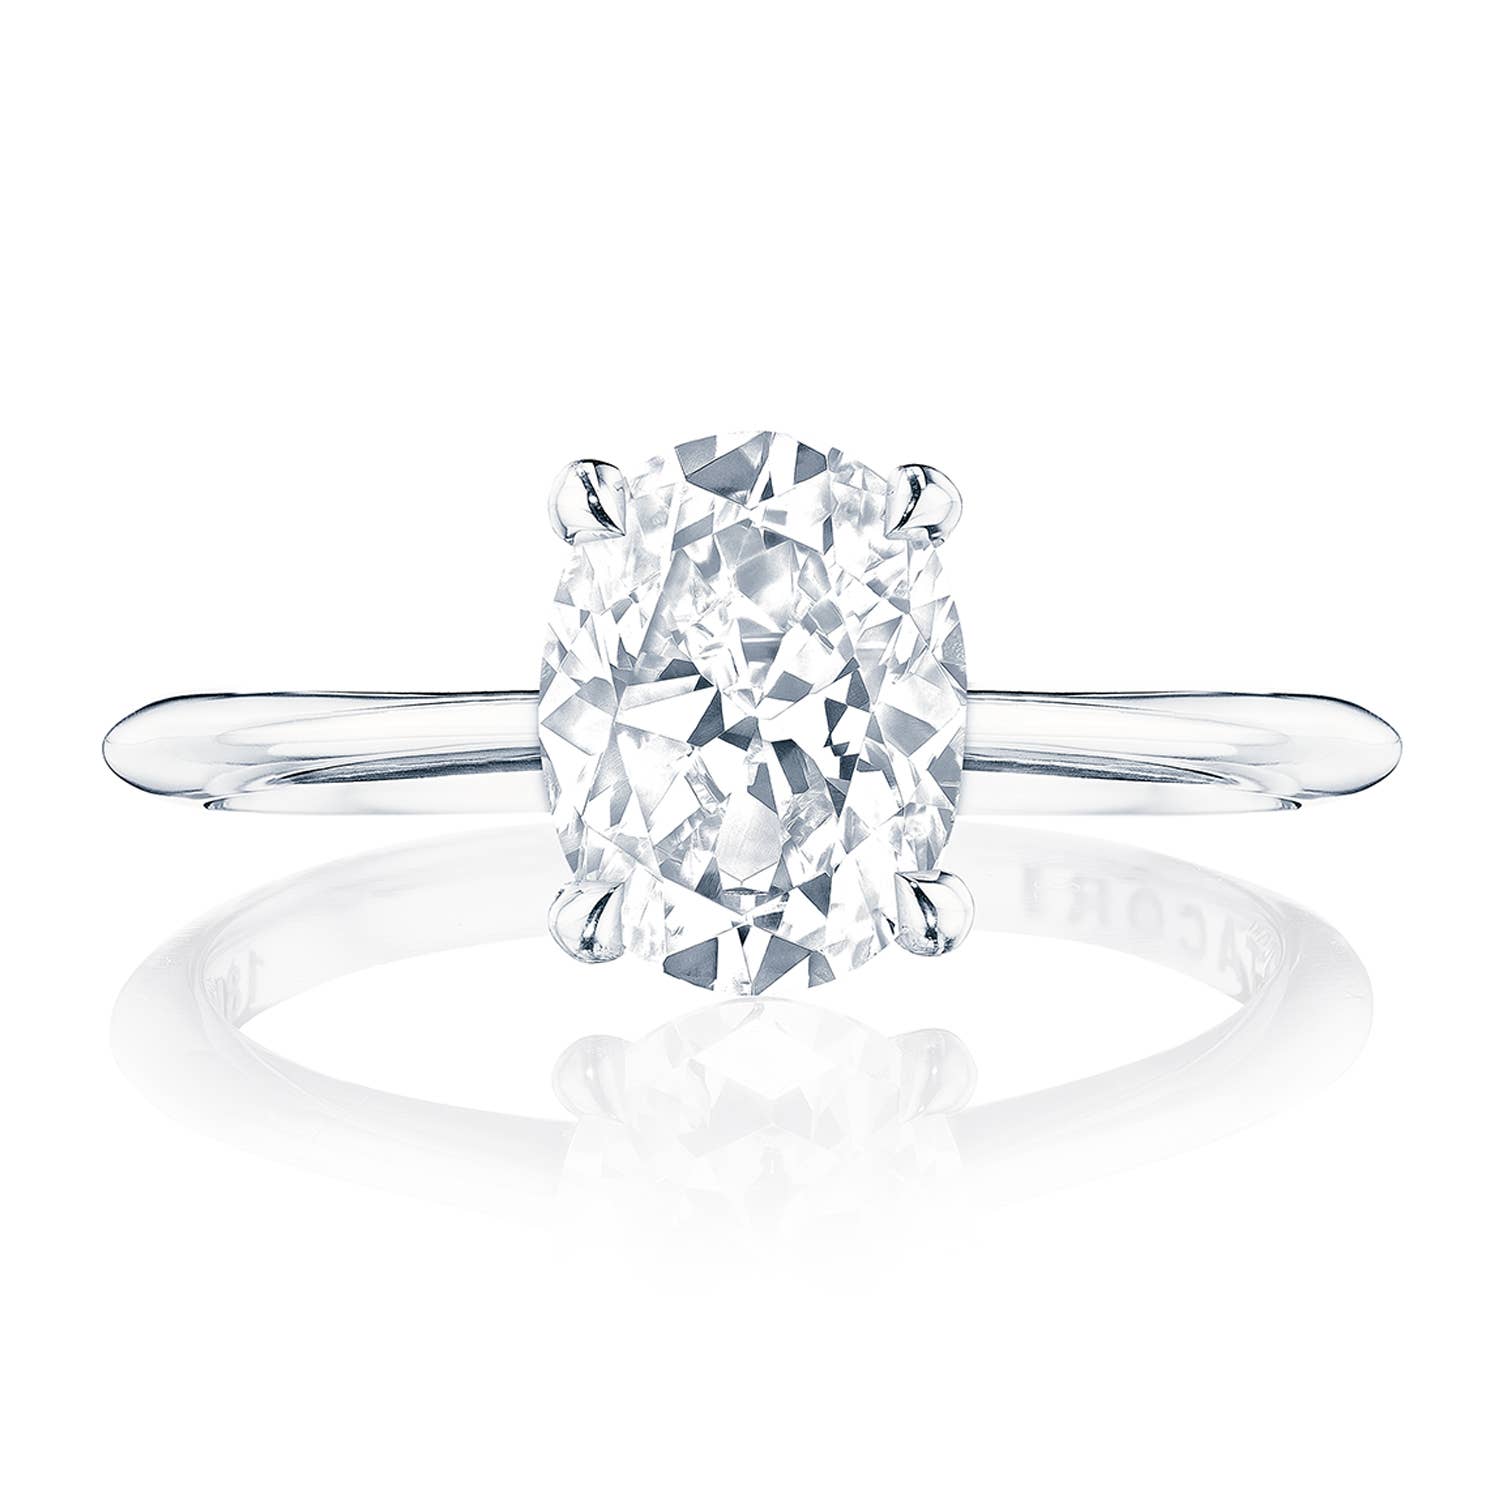 Founder's Collection | Oval Solitaire Engagement Ring HT2580OV85x65